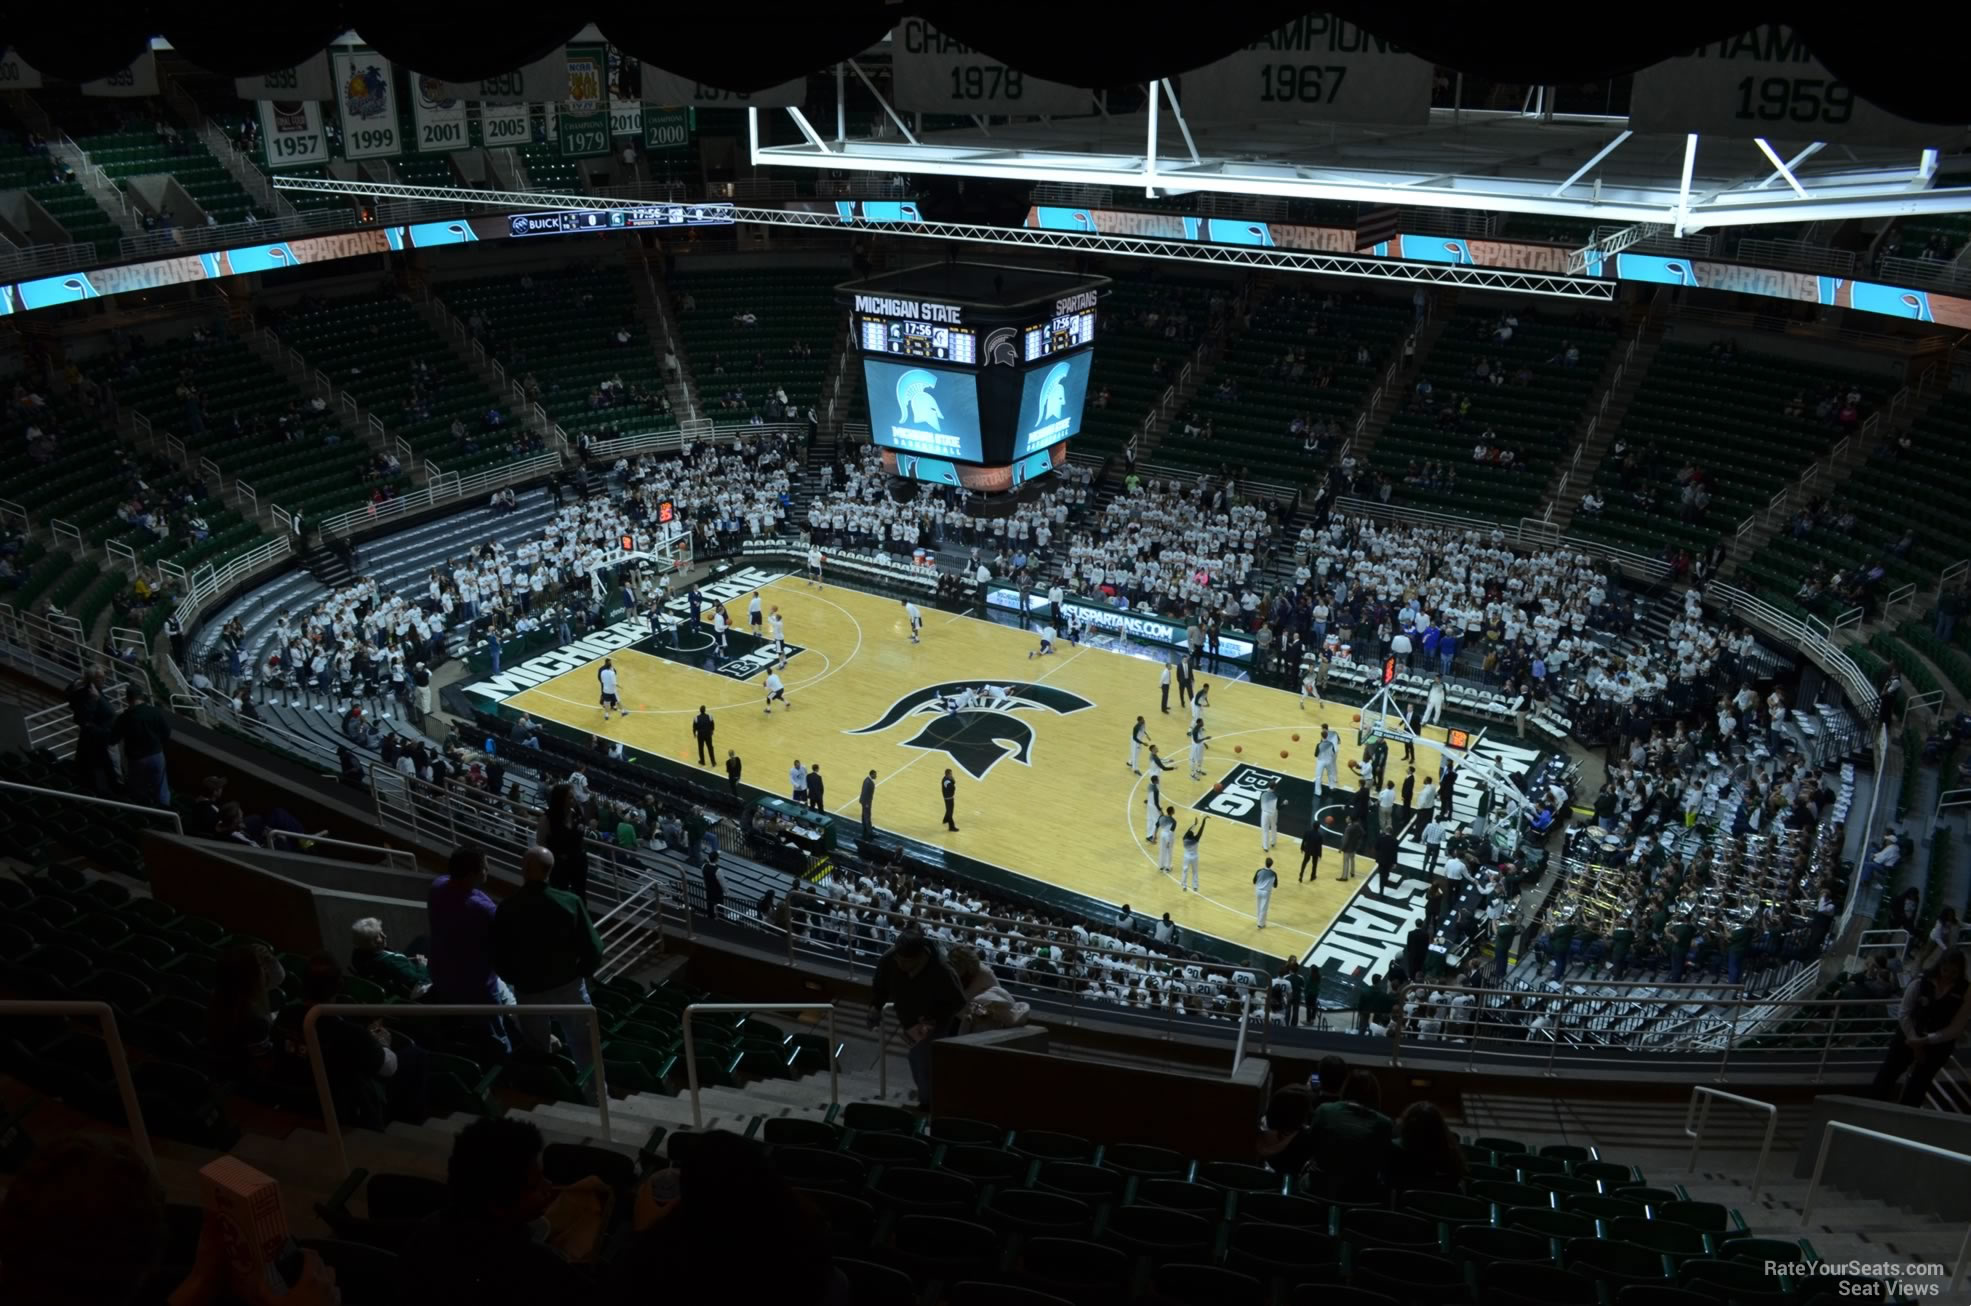 section 224, row 15 seat view  - breslin center